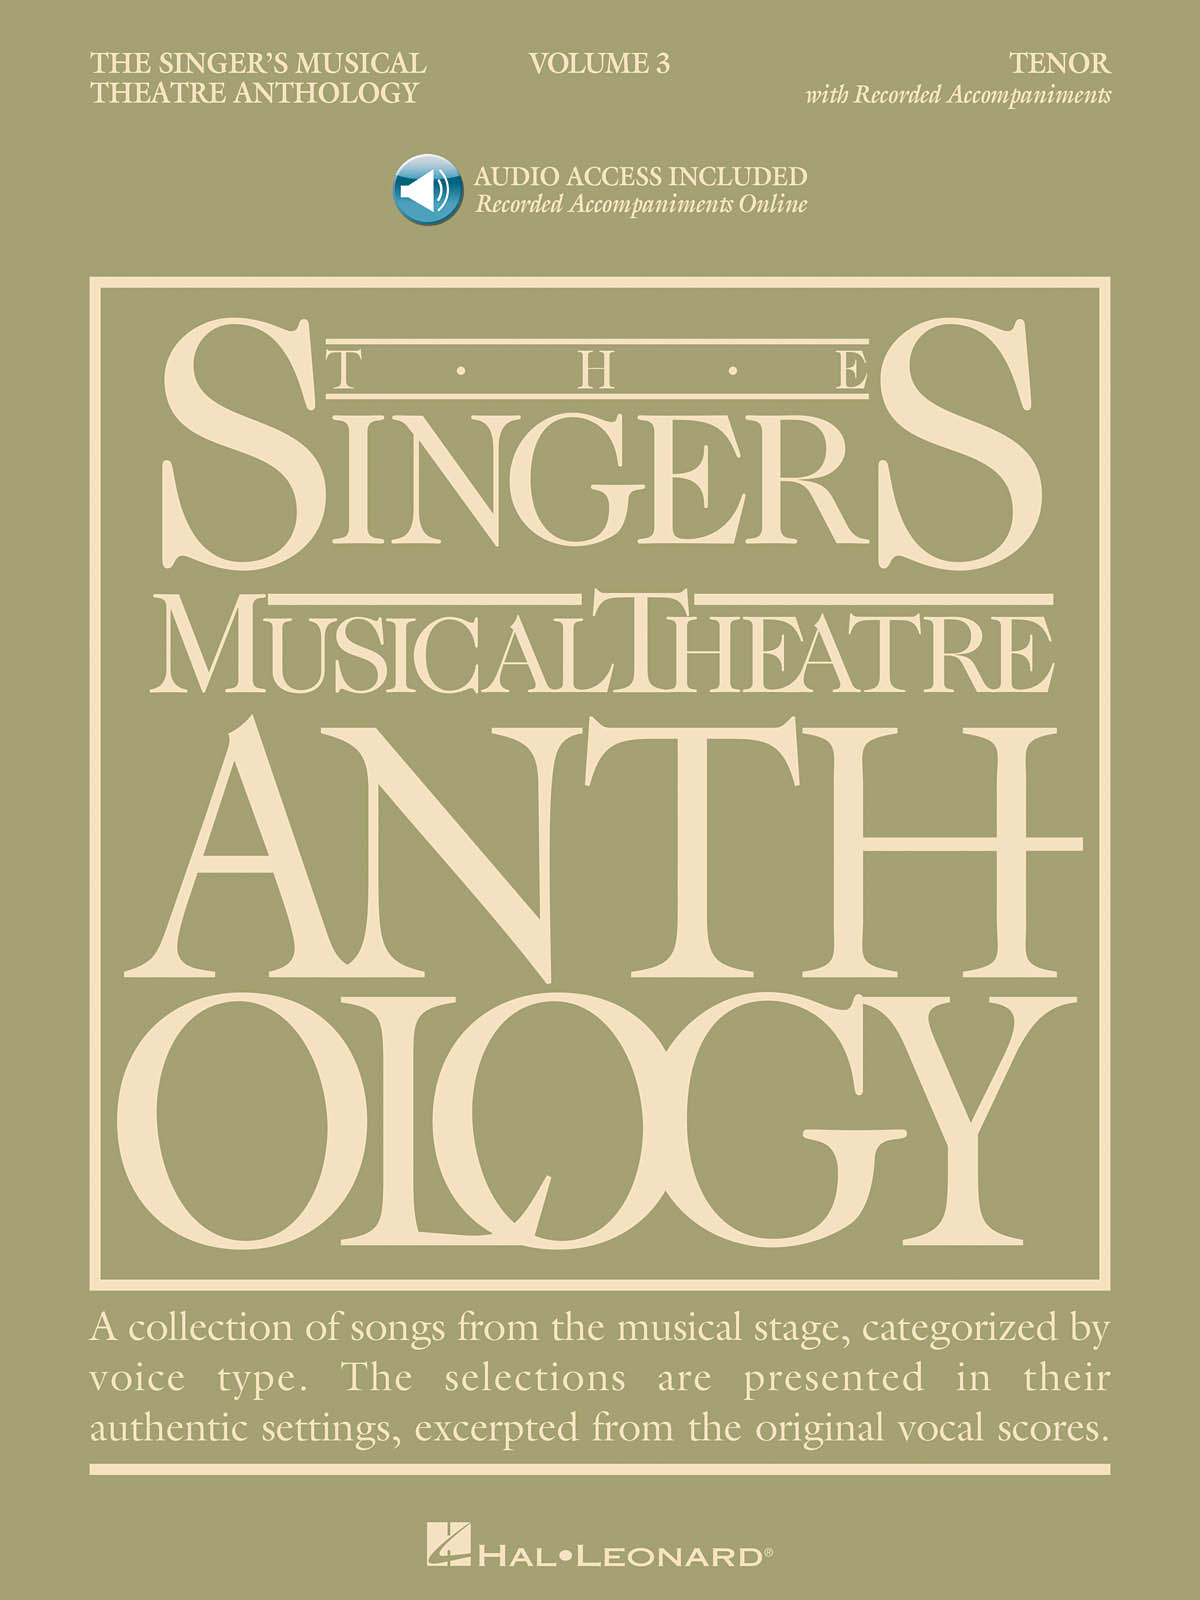 Singer's Musical Theatre Anthology - Volume 3 - Tenor Voice - noty pro hlas tenor